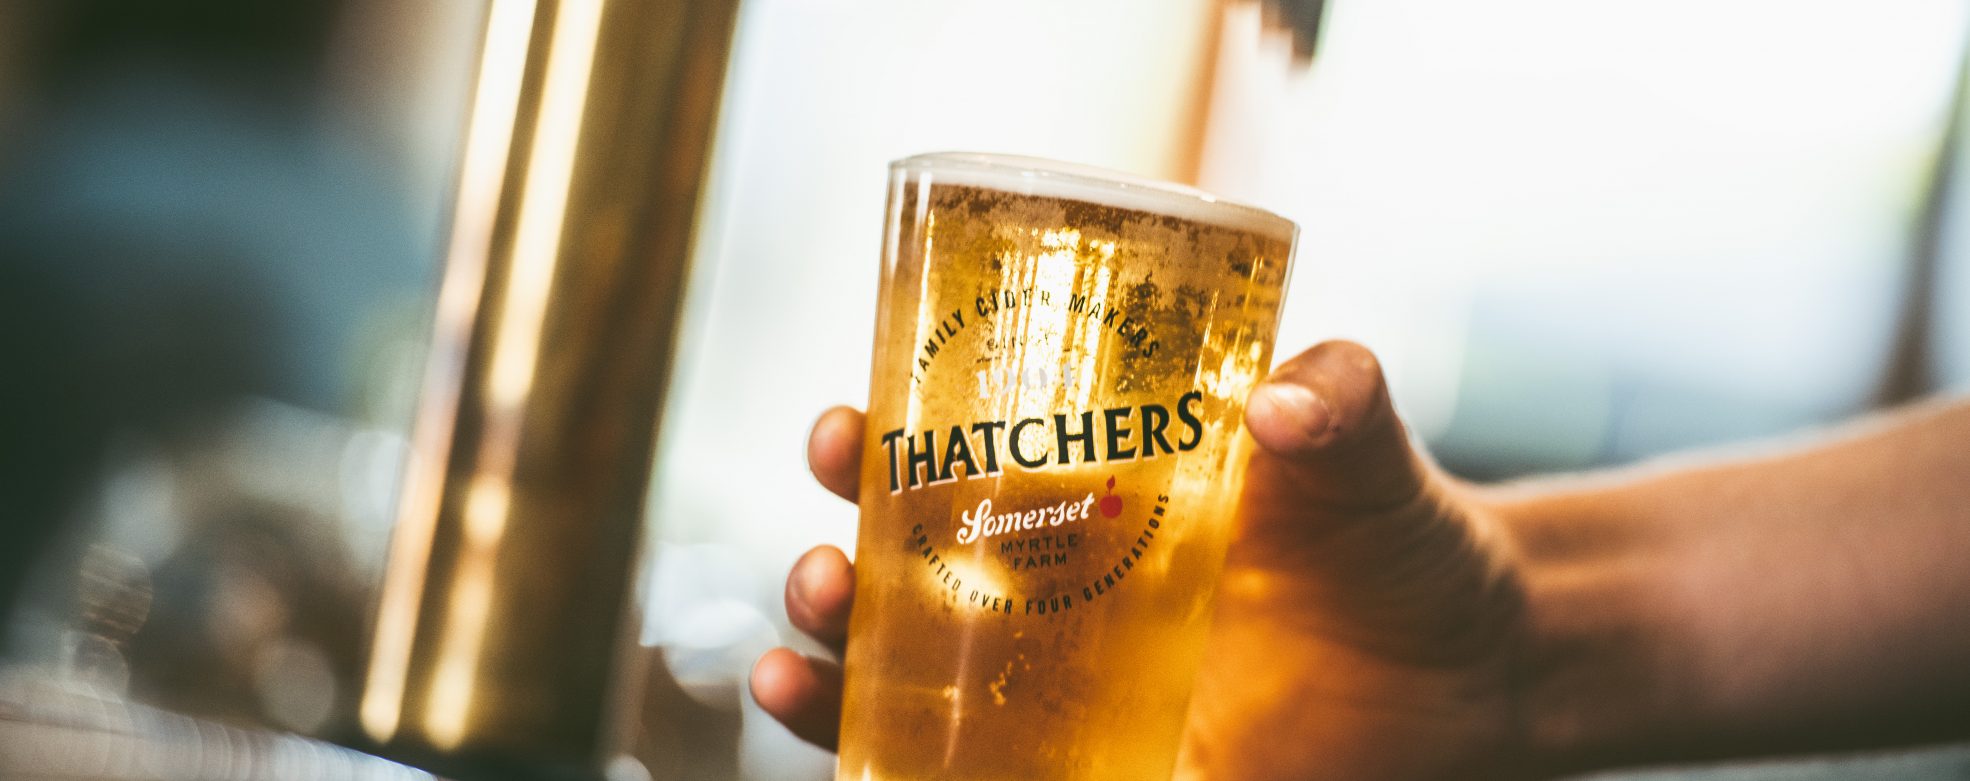 If you’re only stocking one apple cider in 2020, make it Thatchers Gold